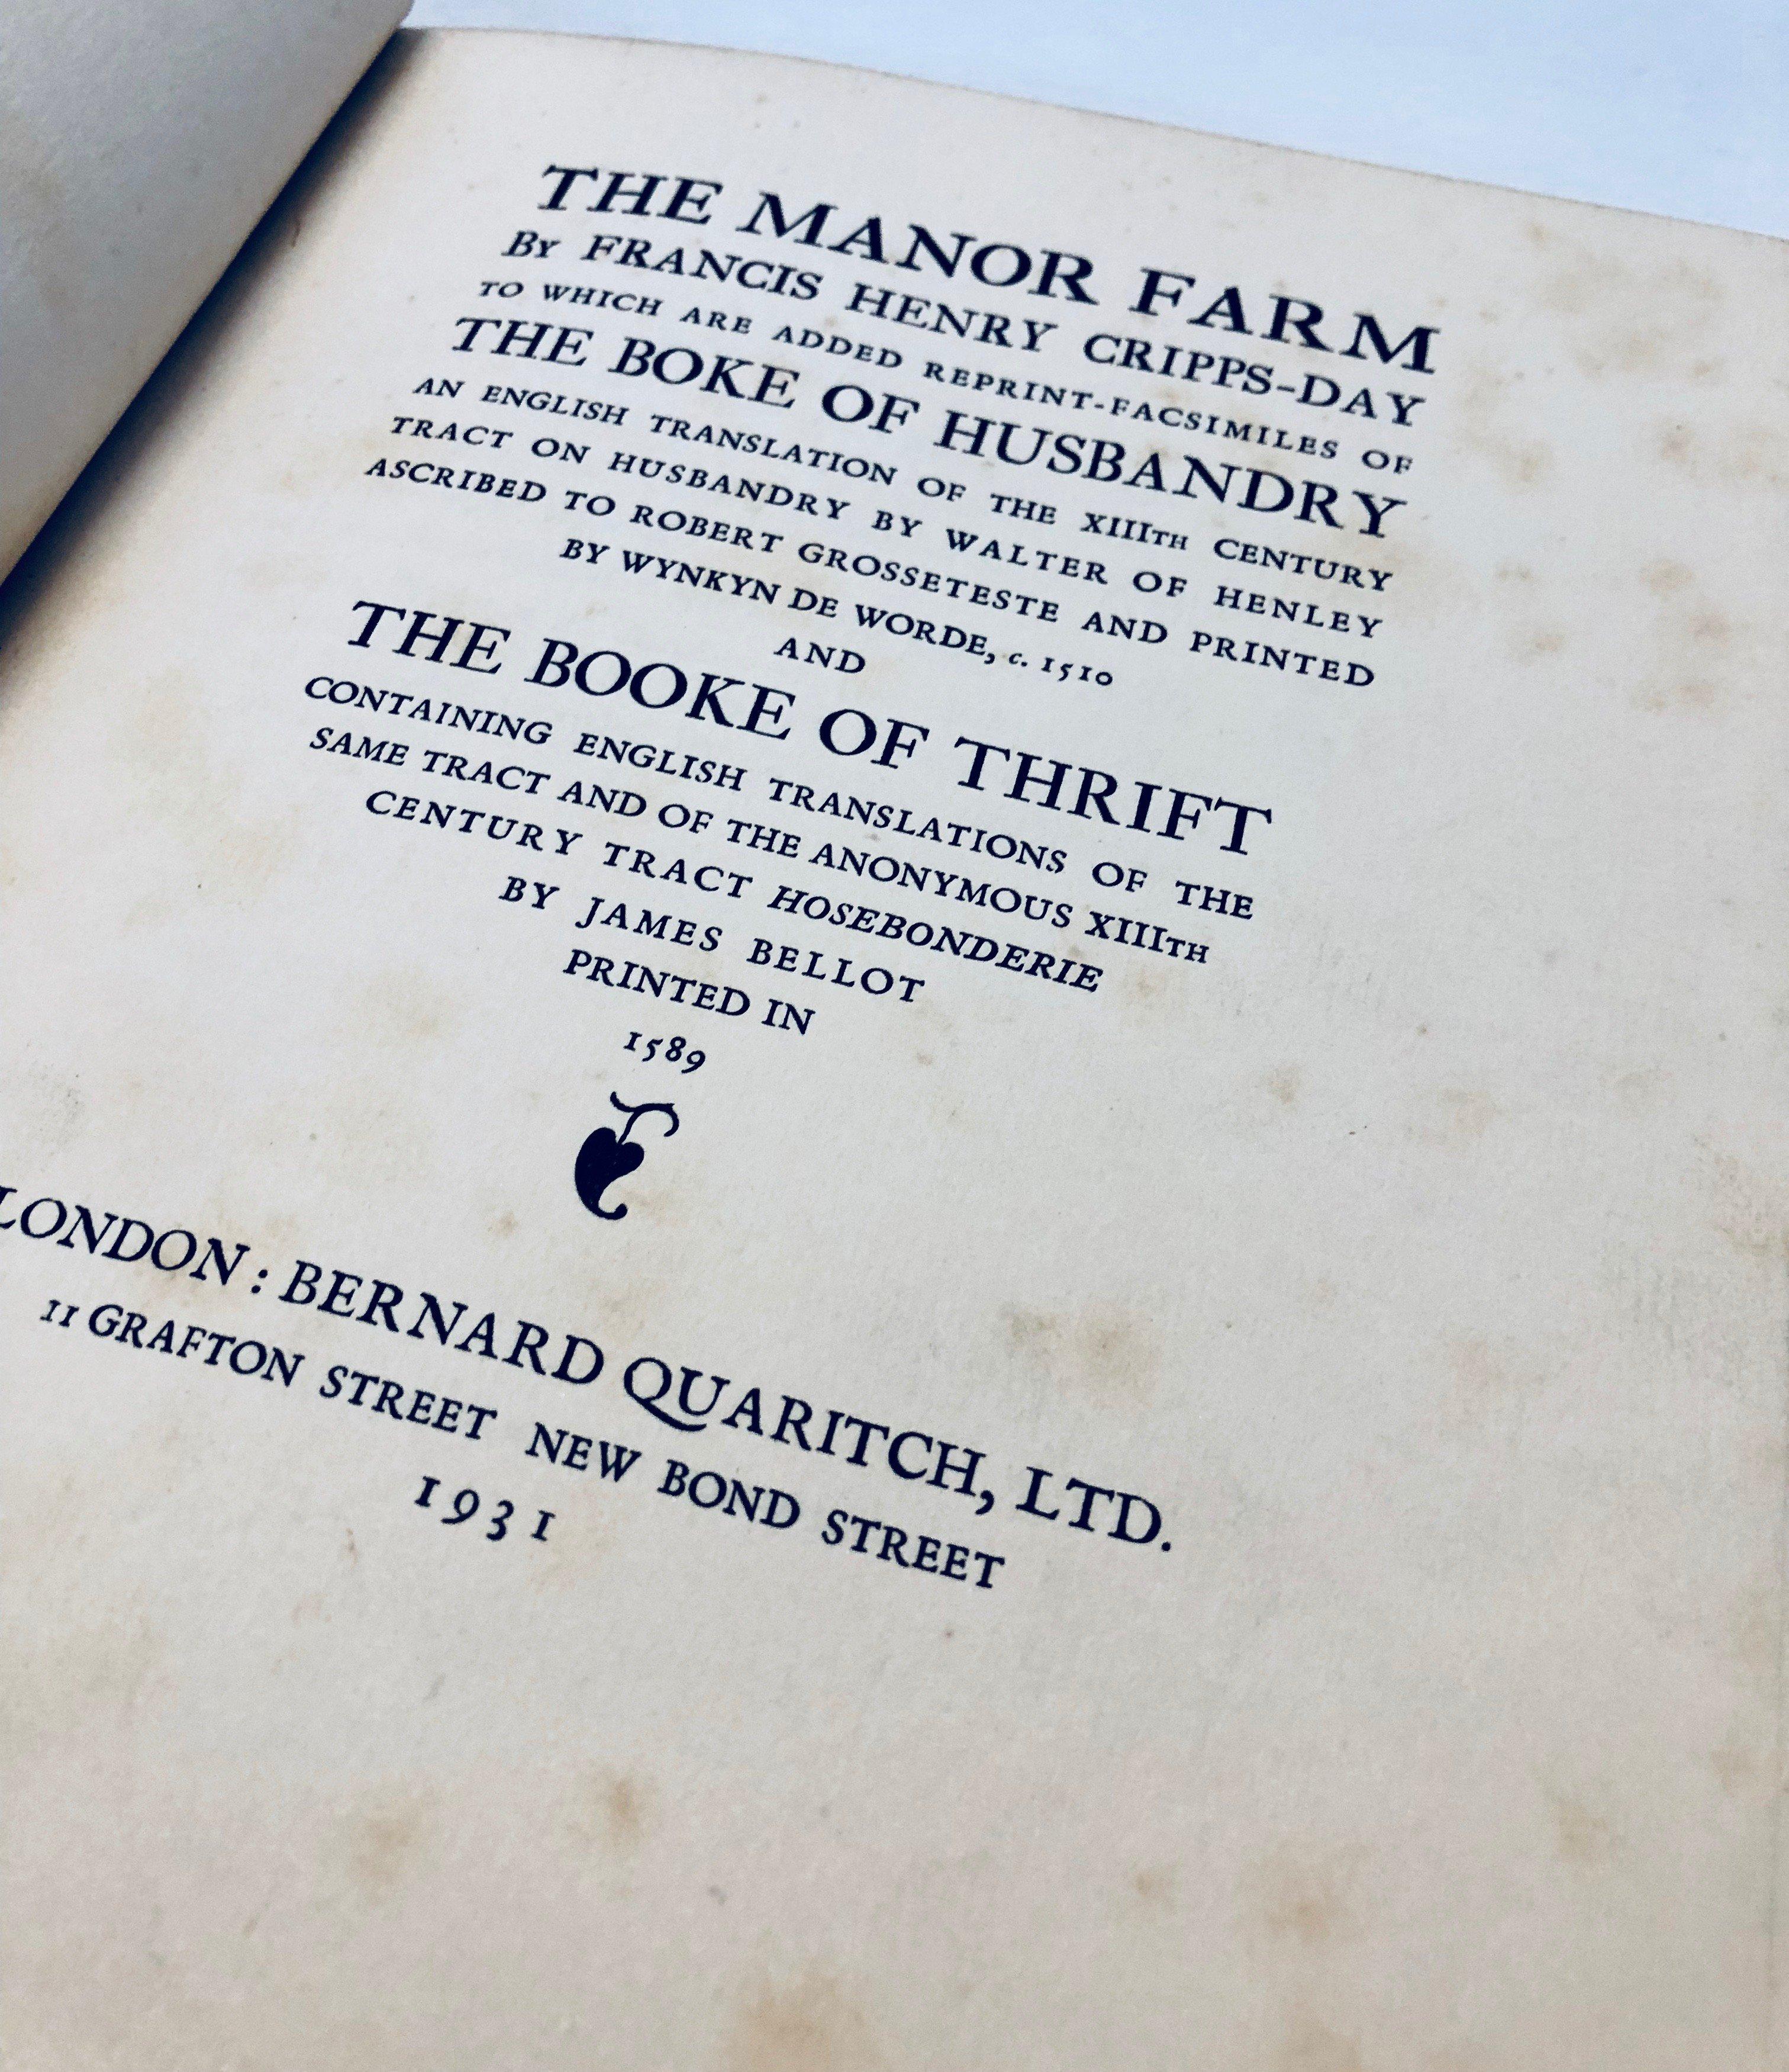 The Manor Farm to Which are Added Facsimiles of the Book of Husbandry 1510, and Book of Thrift 1589